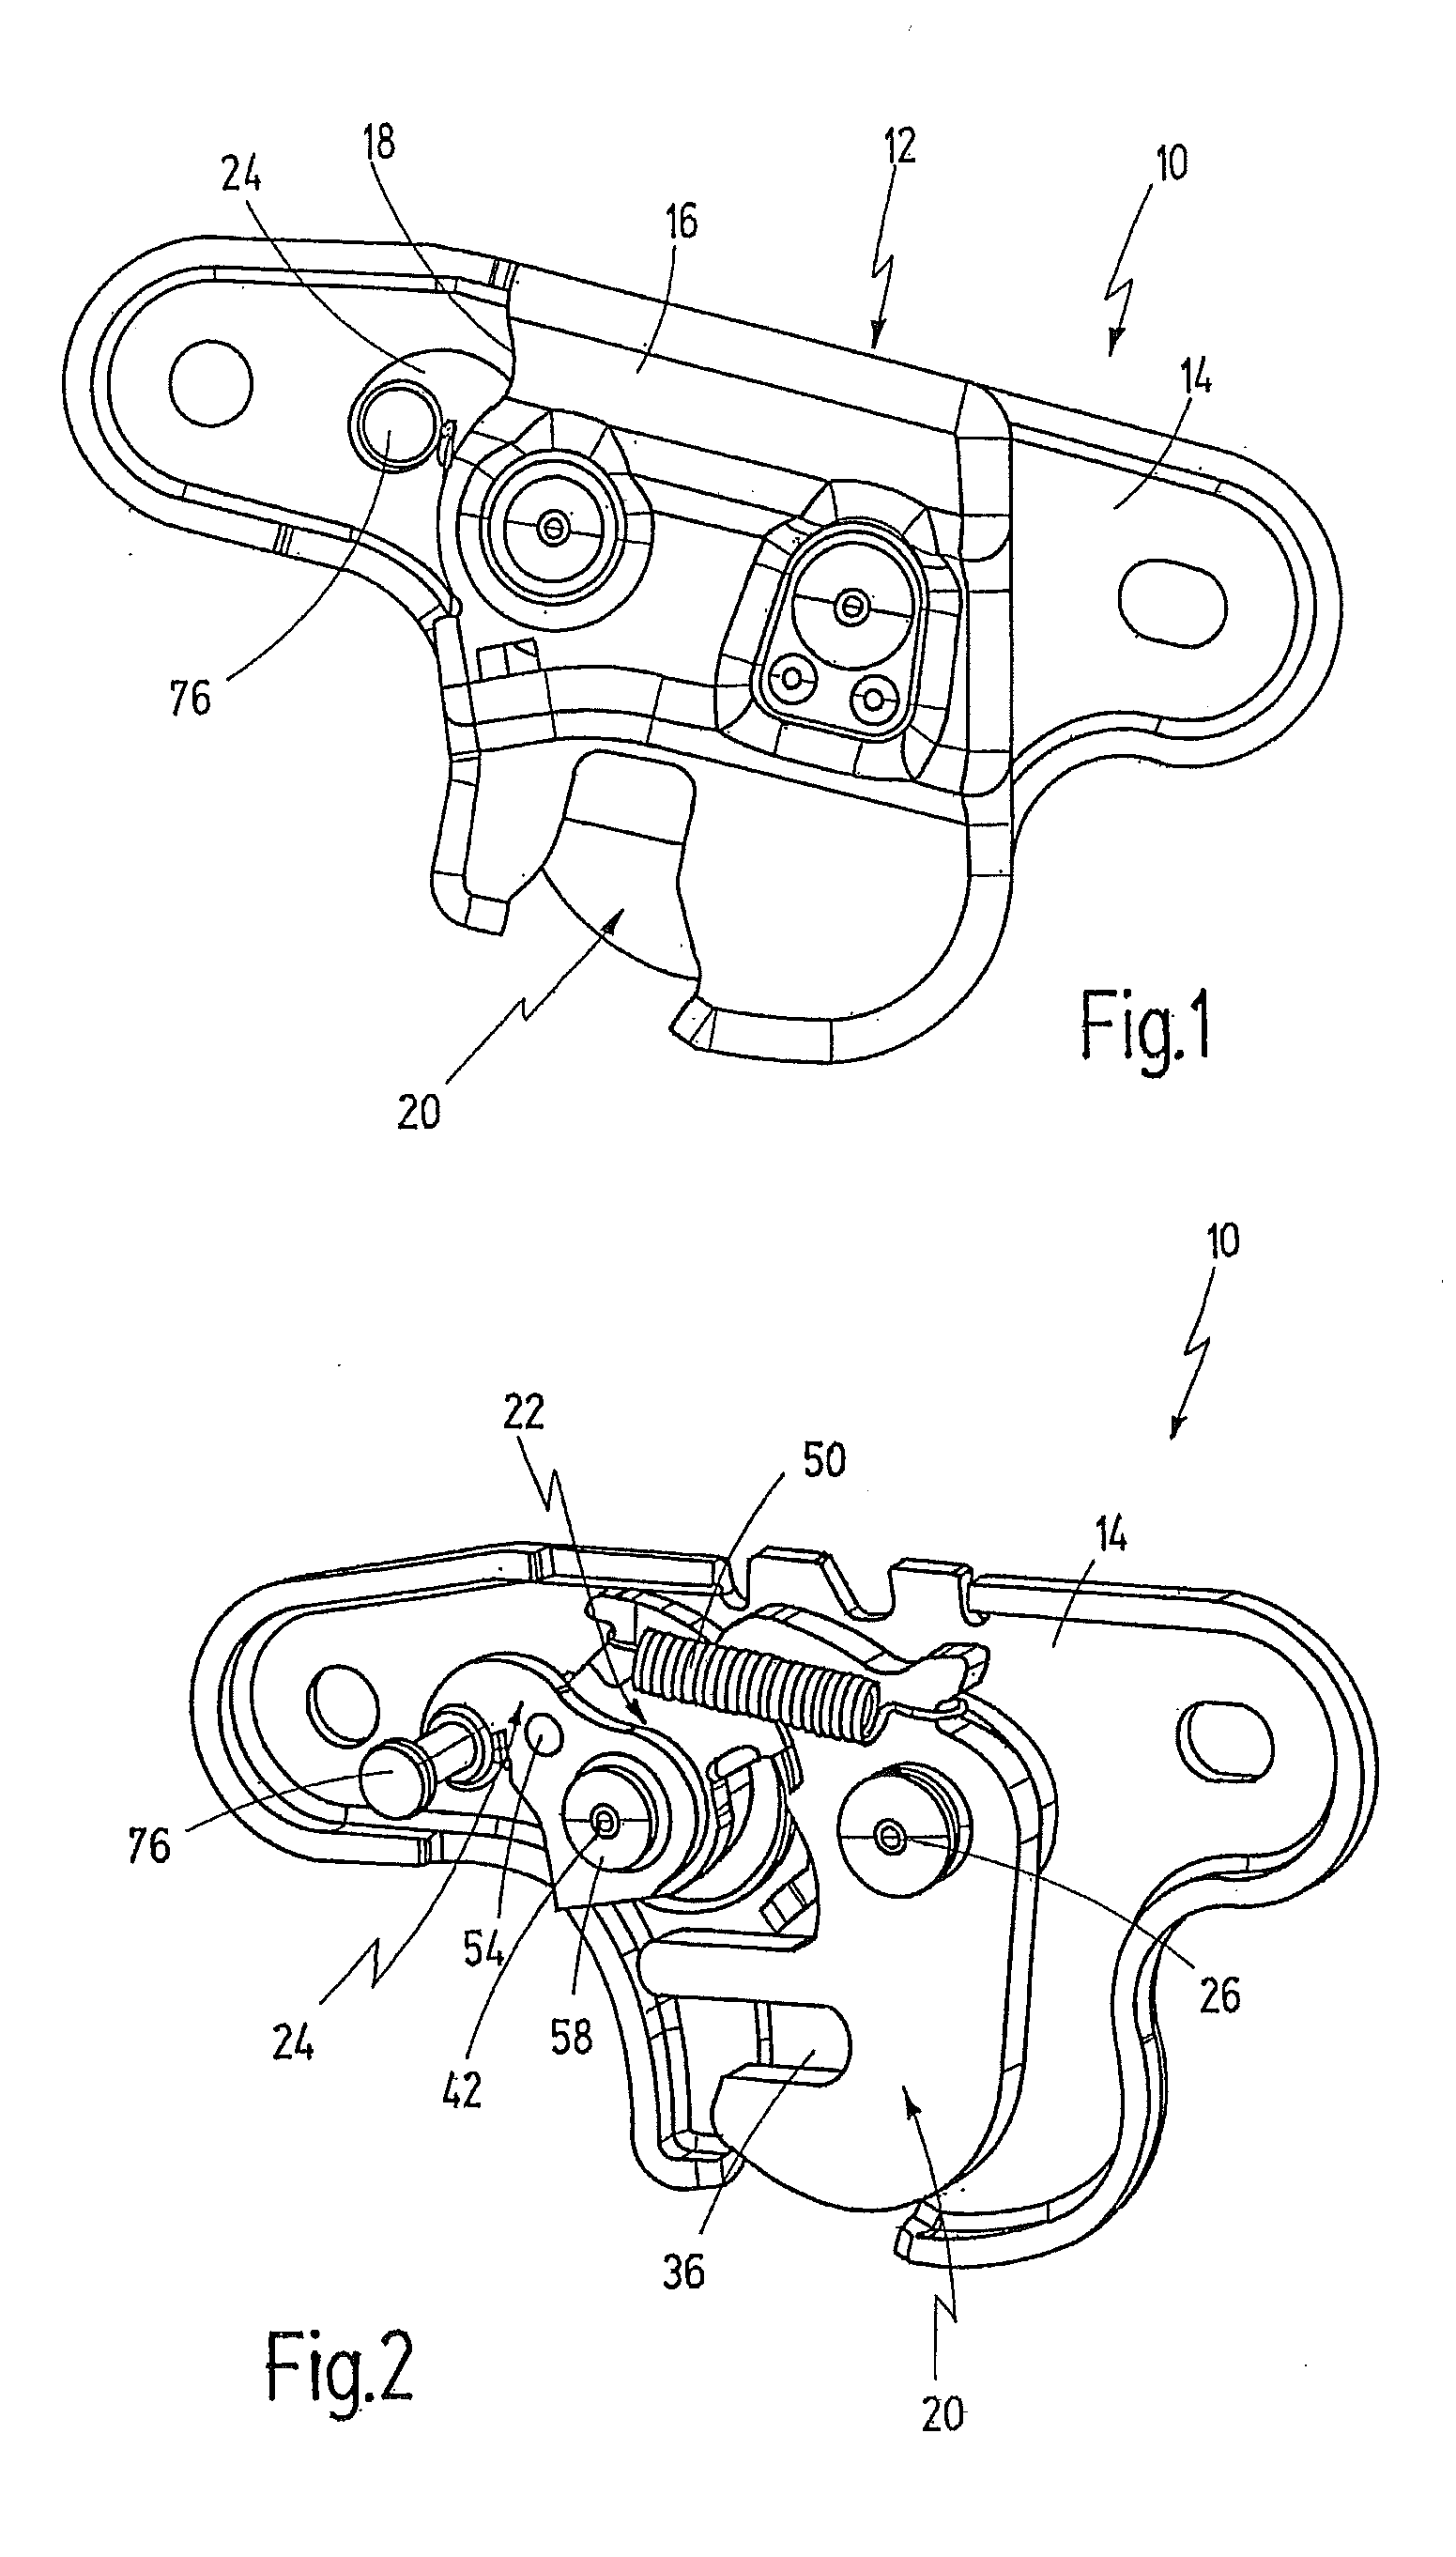 Device for locking a vehicle seat